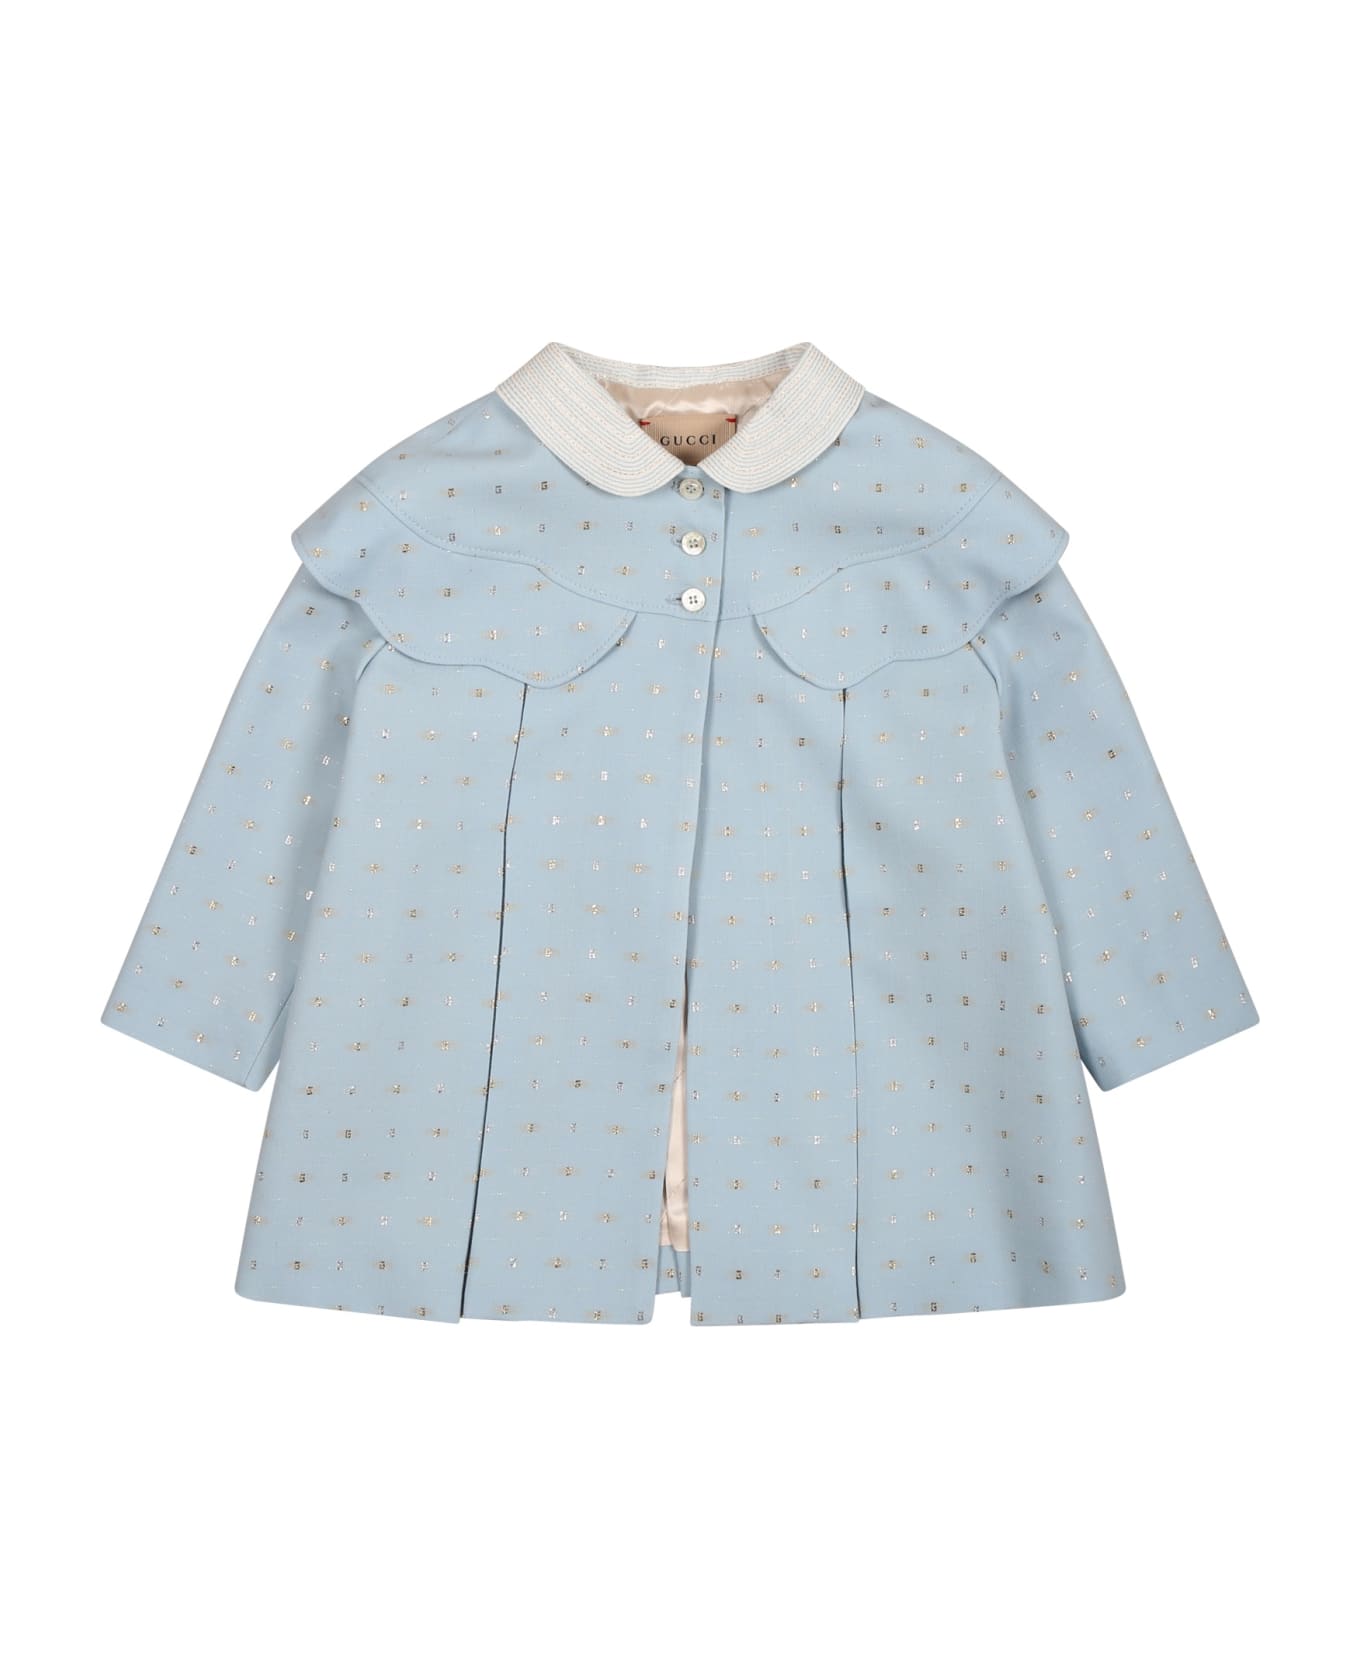 Gucci Light Blue Coat For Baby Girl With G Pattern - Light Blue